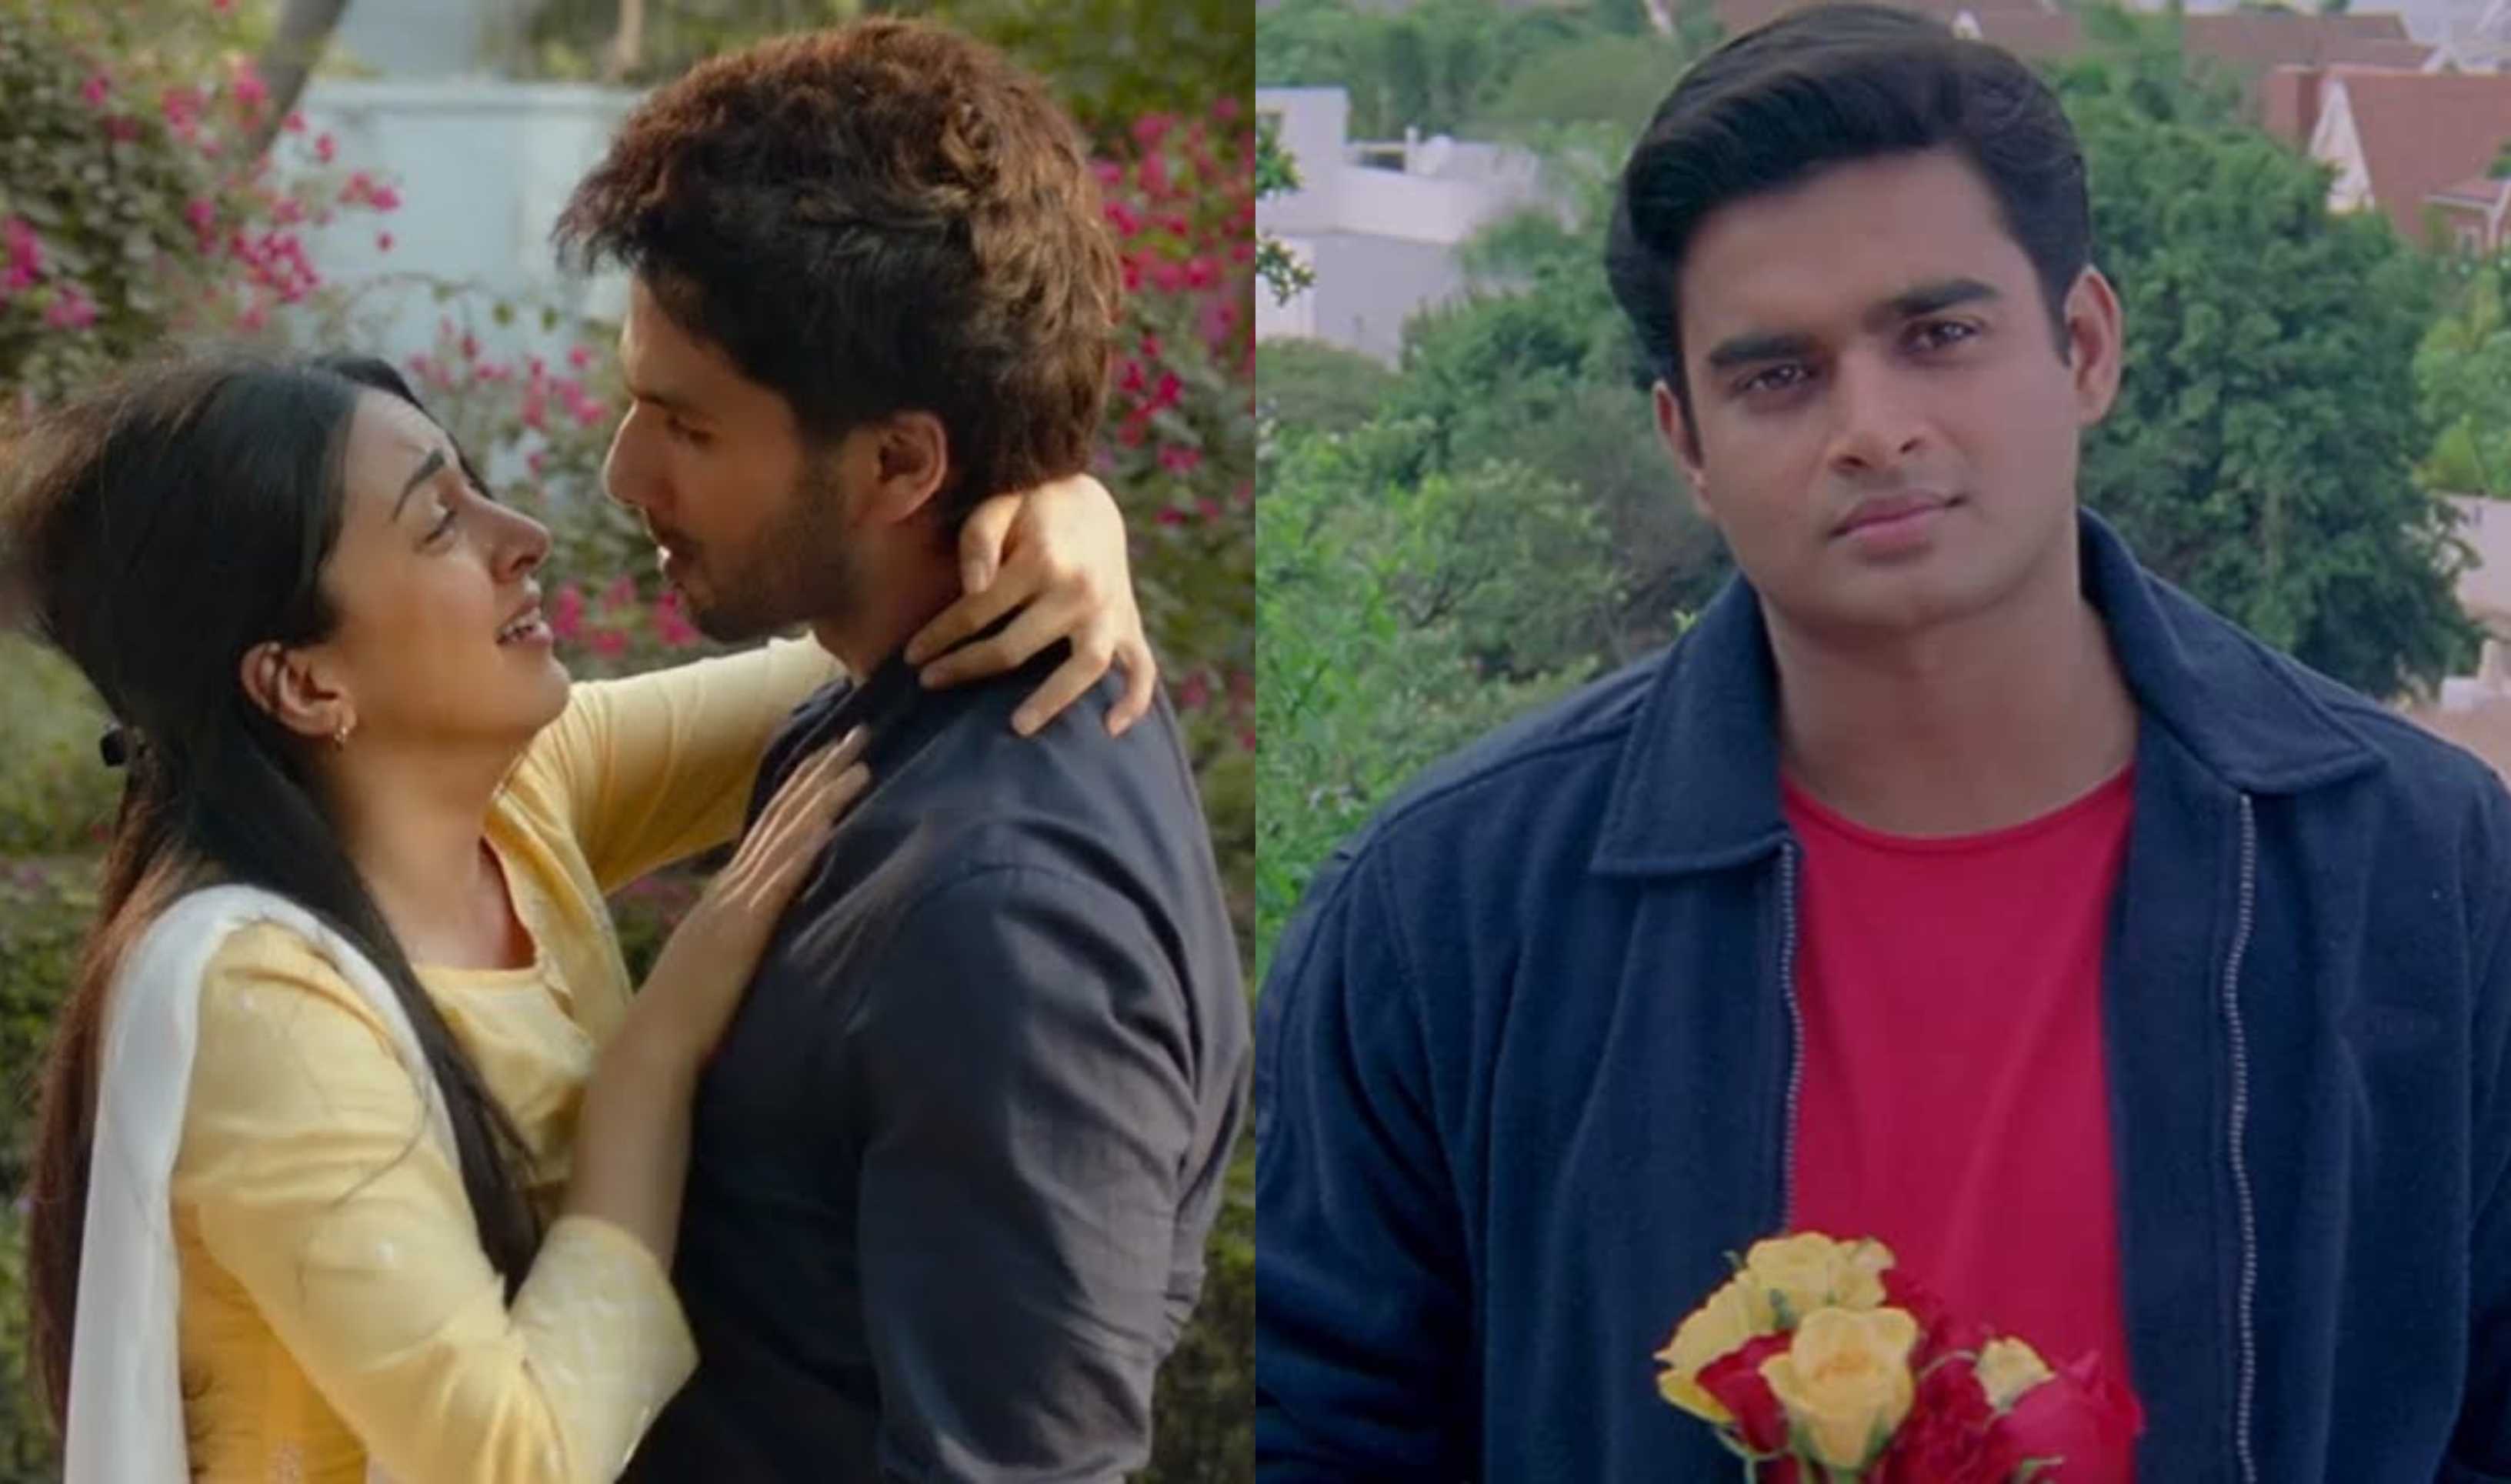 From Kabir Singh’s slap to Maddy impersonating Rajeev, 5 toxic scenes from Bollywood films that were just ridiculous